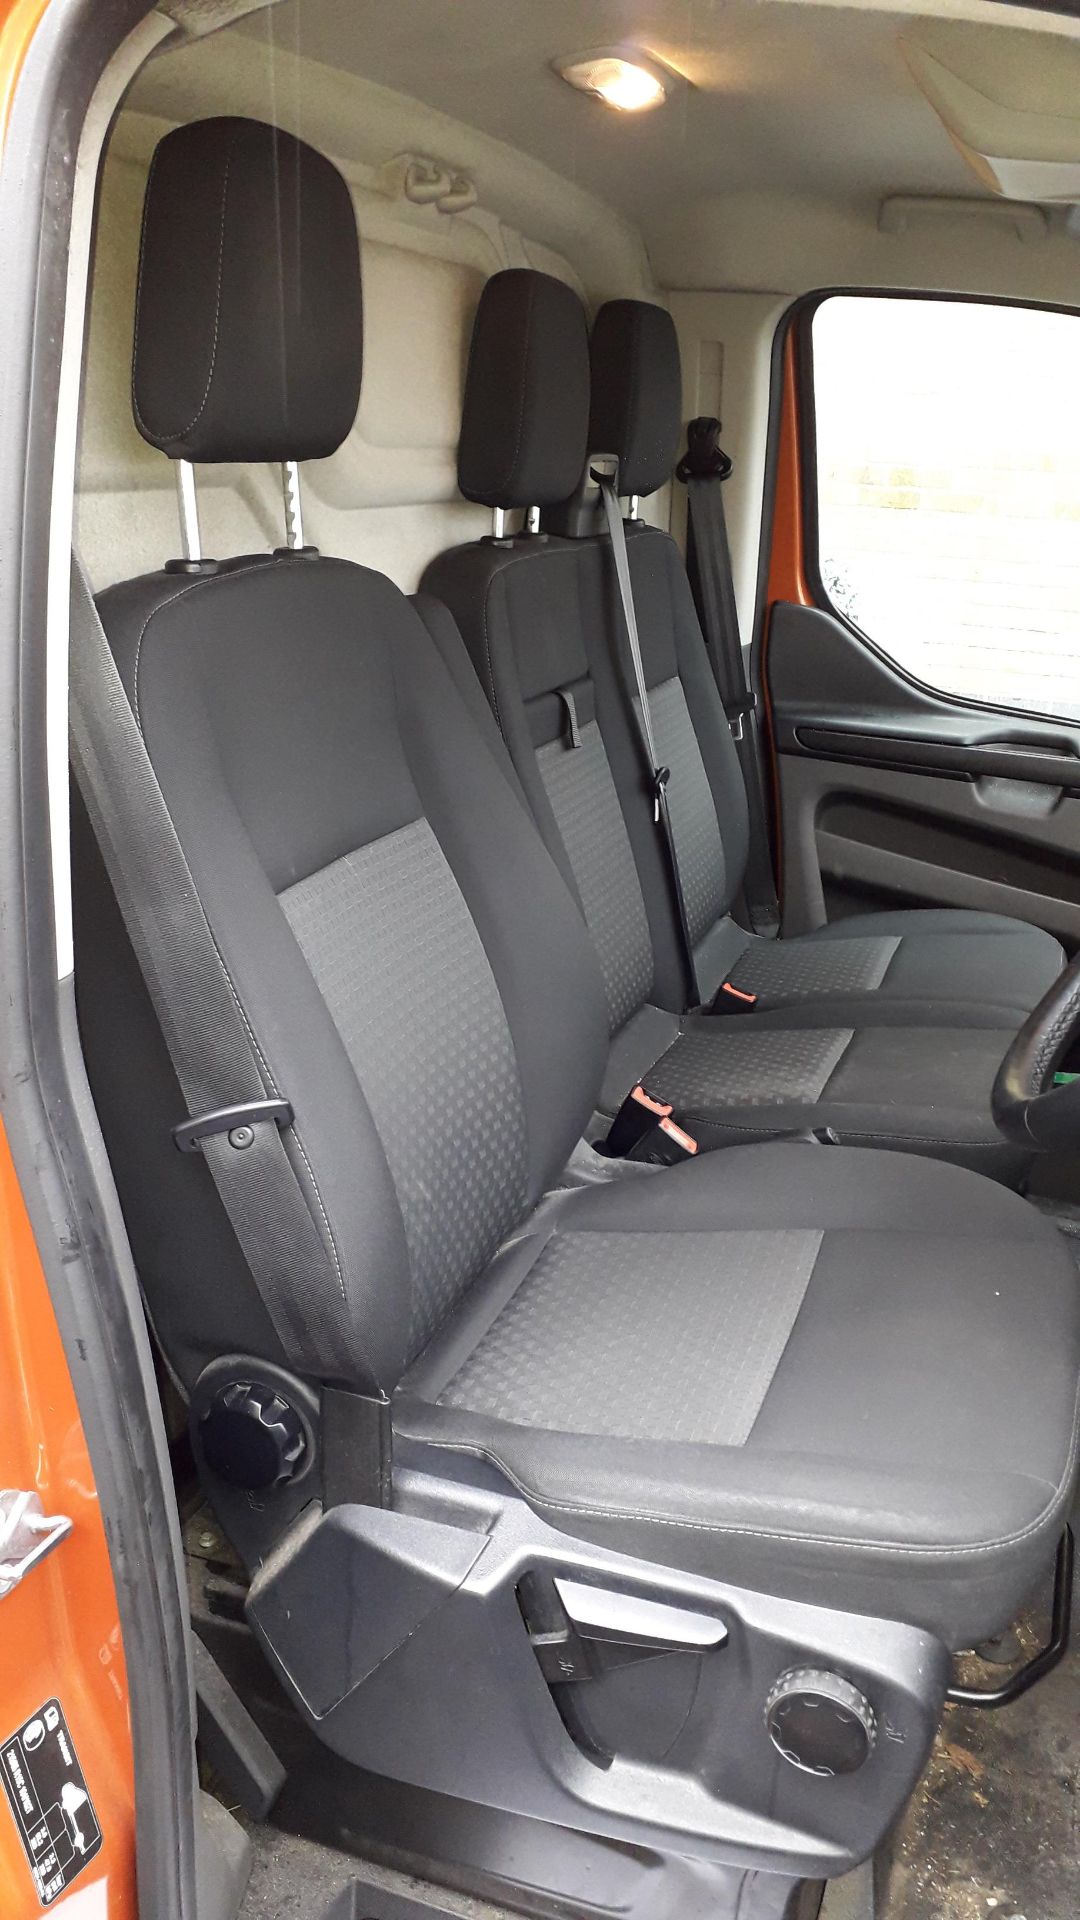 Ford Transit Custom 300 L2 FWD TDCi 130PS Low Roof - Image 10 of 31